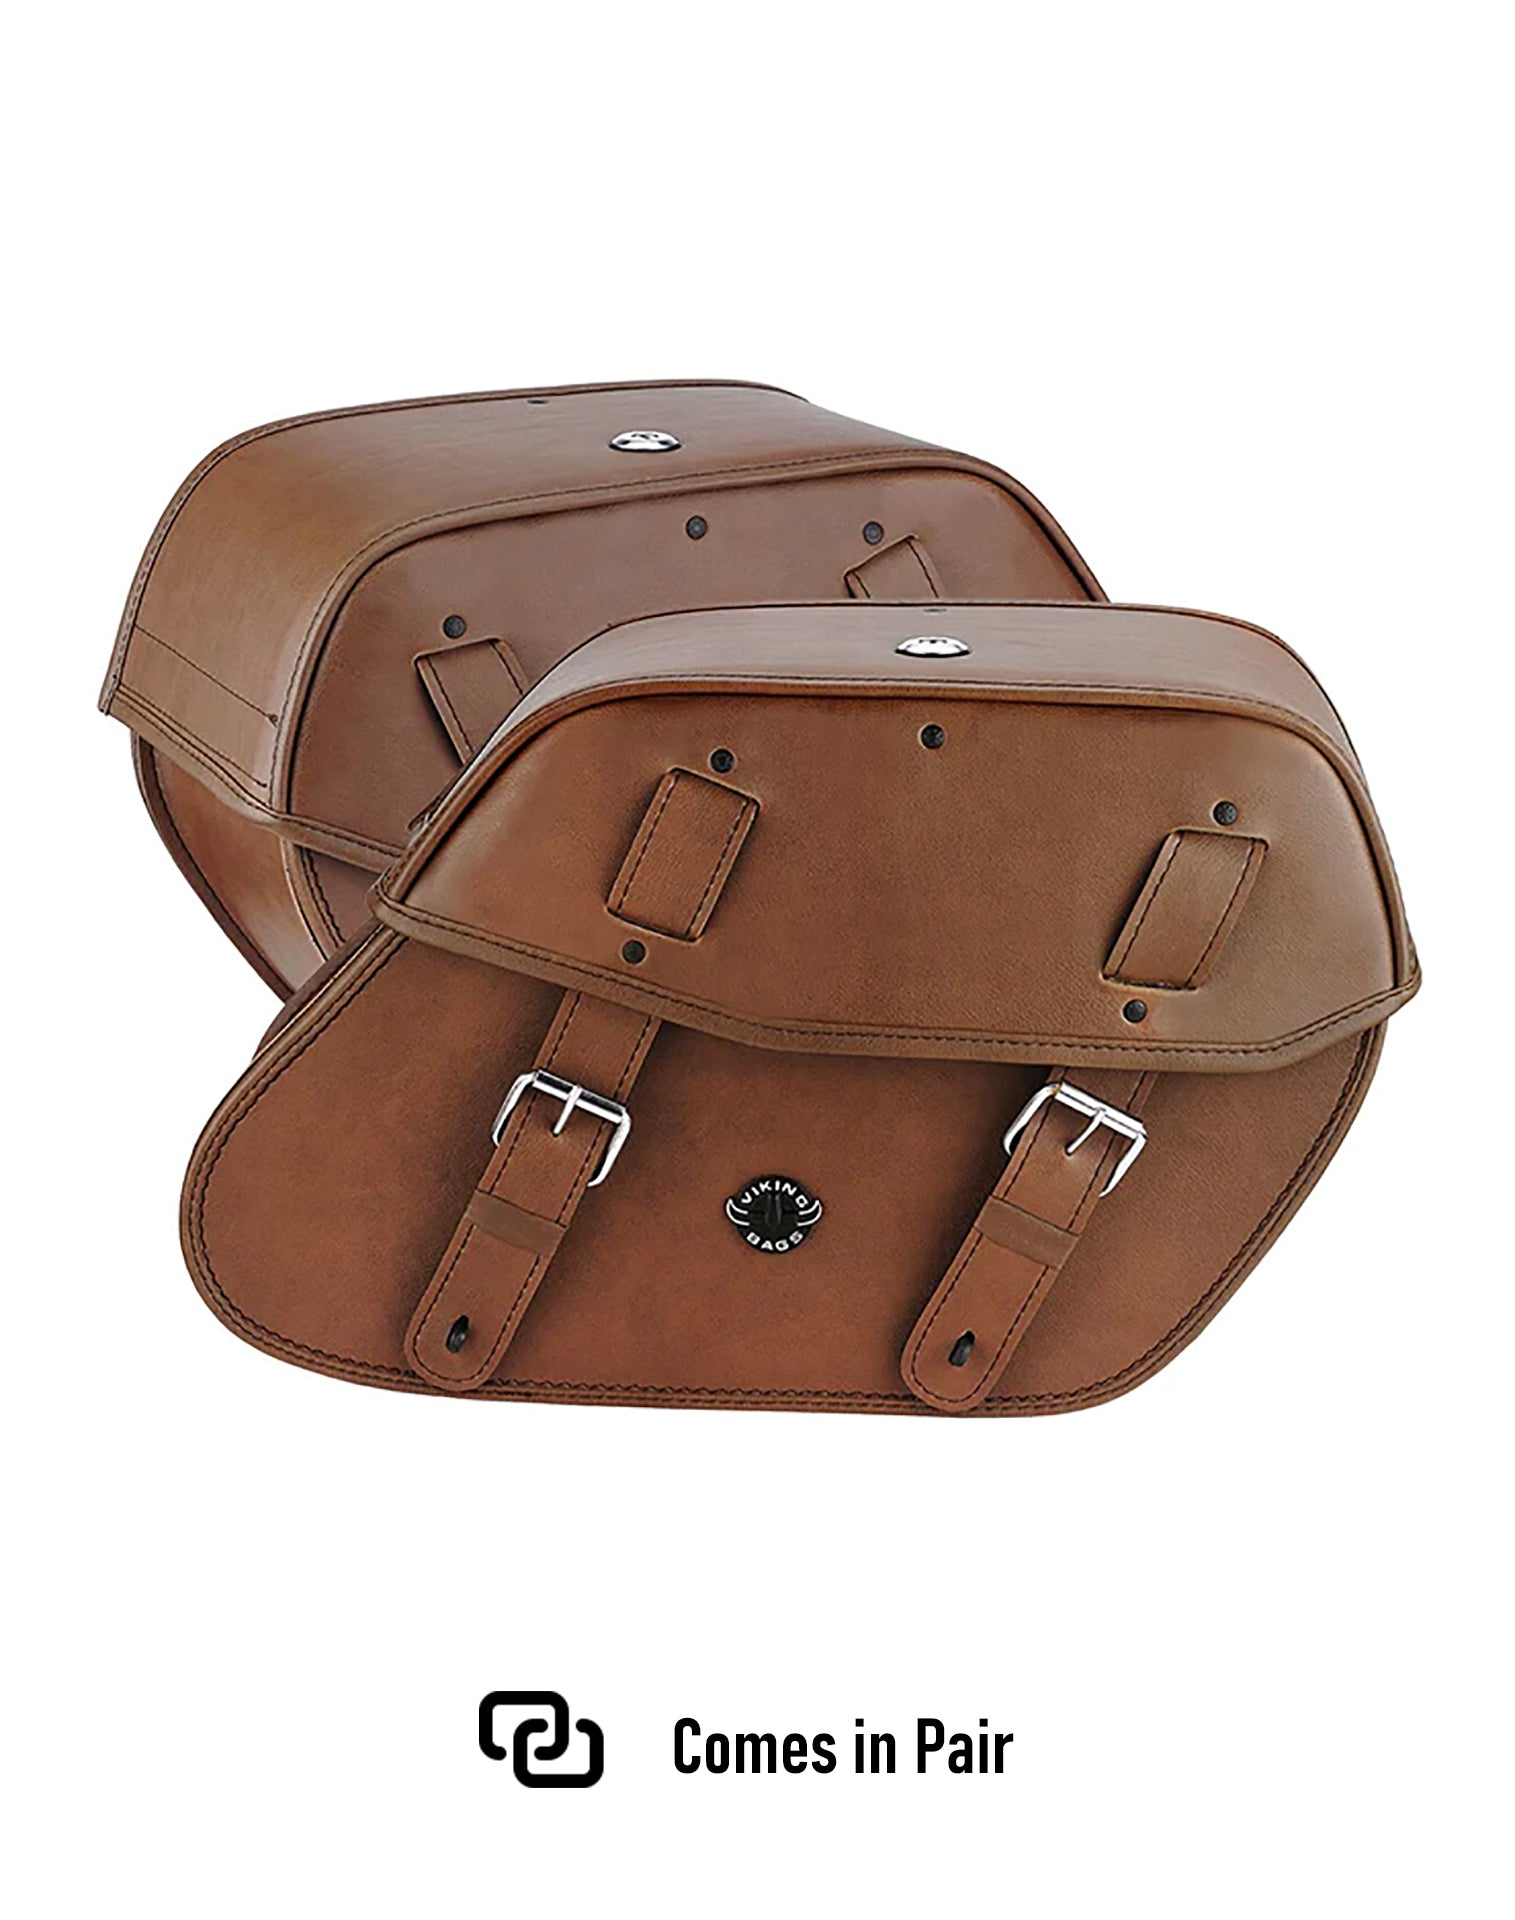 Viking Odin Brown Large Victory Jackpot Leather Motorcycle Saddlebags Weather Resistant Bags Comes in Pair